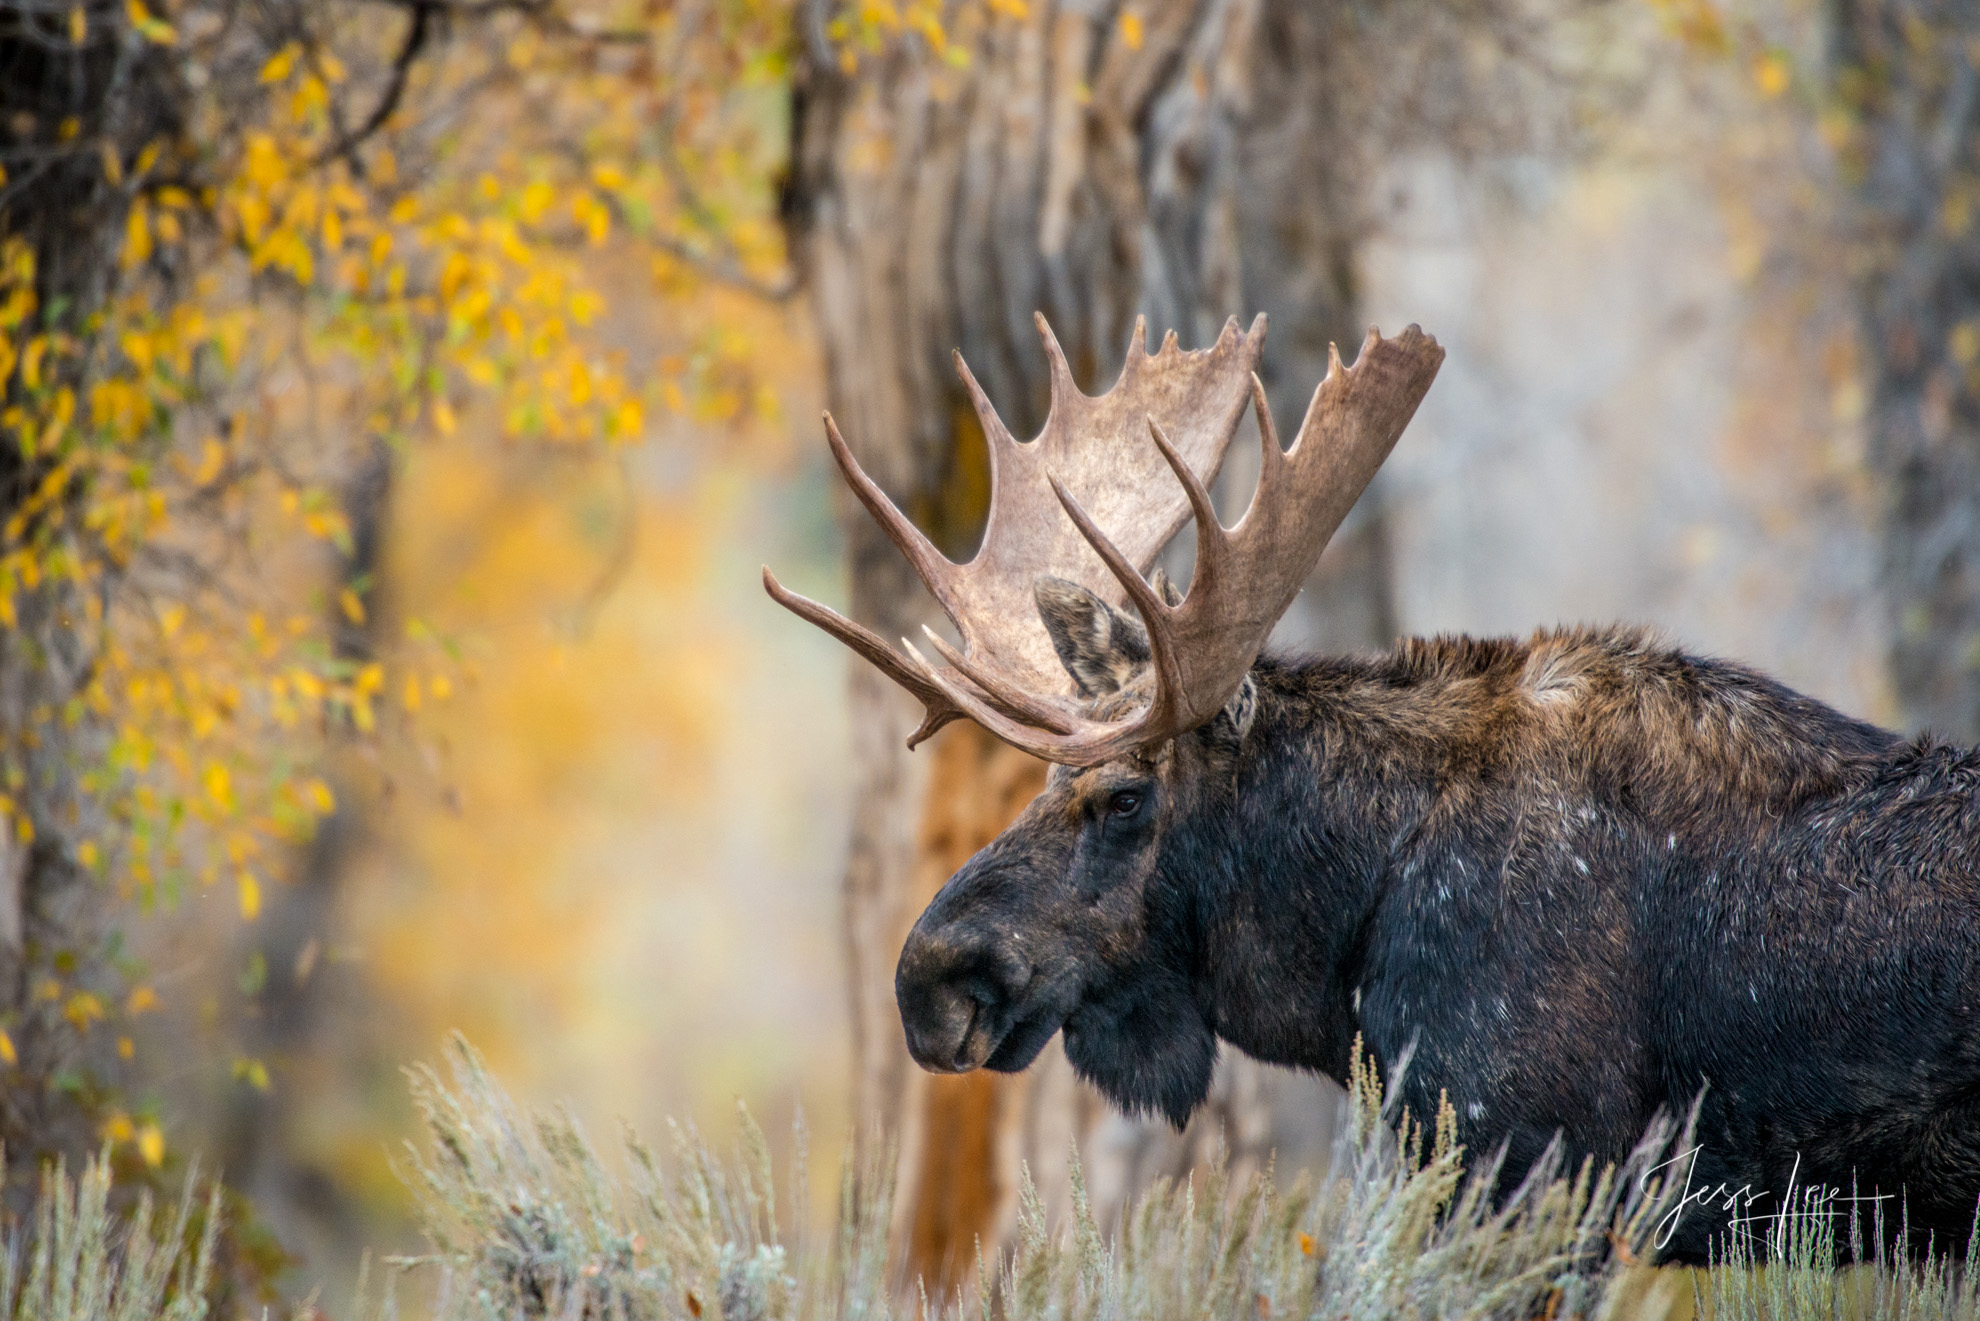 Jackson Hole Bull Moose Limited Edition of 800 Exclusive high-resolution Museum Quality Fine Art Prints of Wildlife Photography...